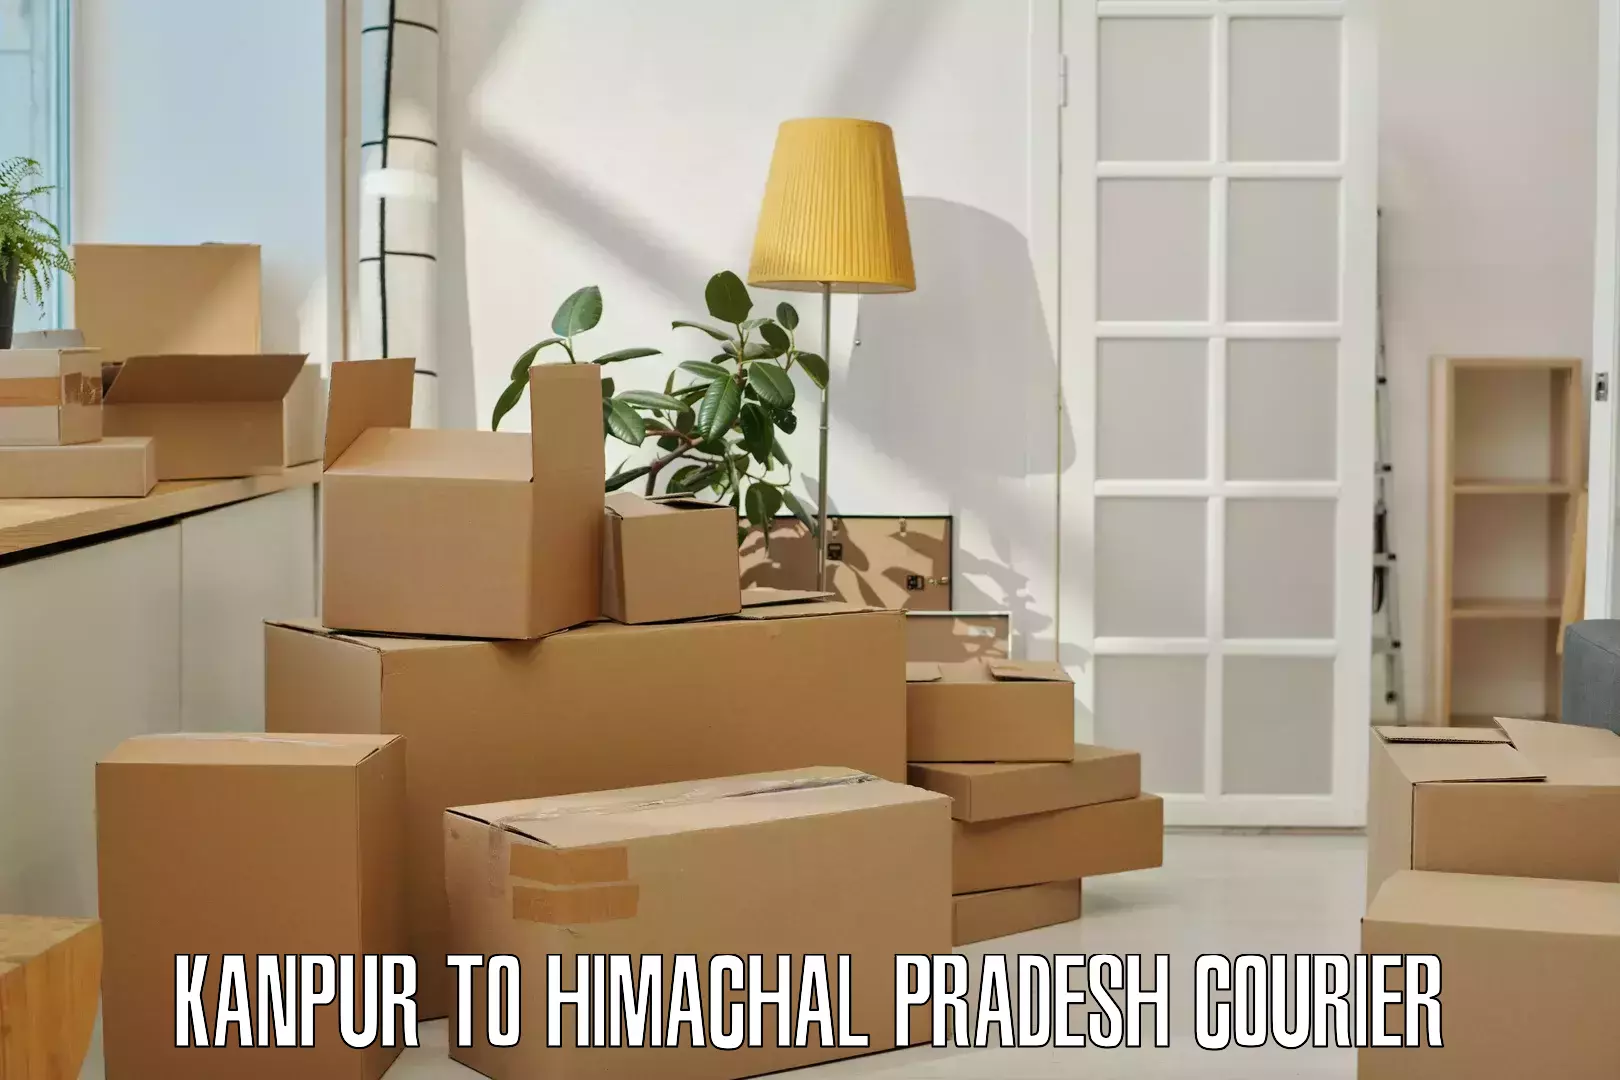 24/7 courier service Kanpur to Himachal Pradesh